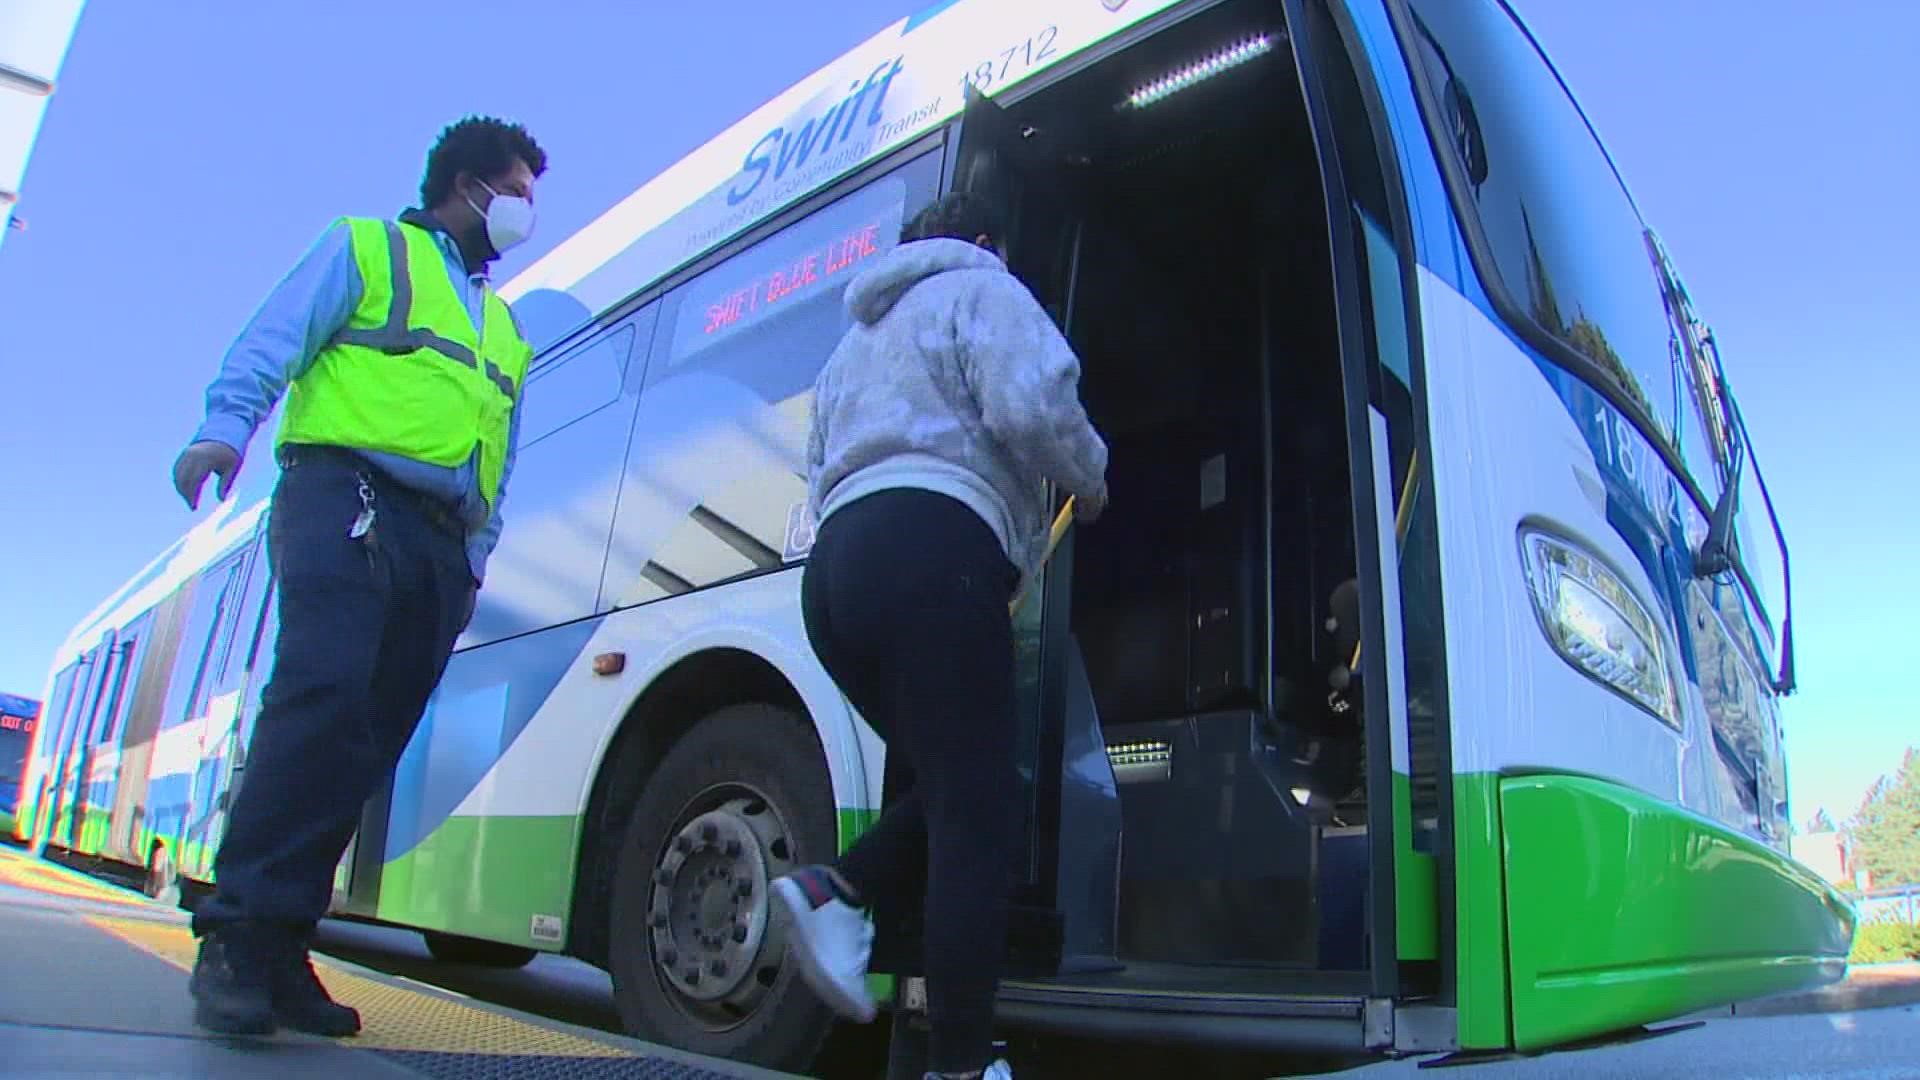 Sound Transit is temporarily reducing service for some routes operated by Community Transit due to operator shortages.